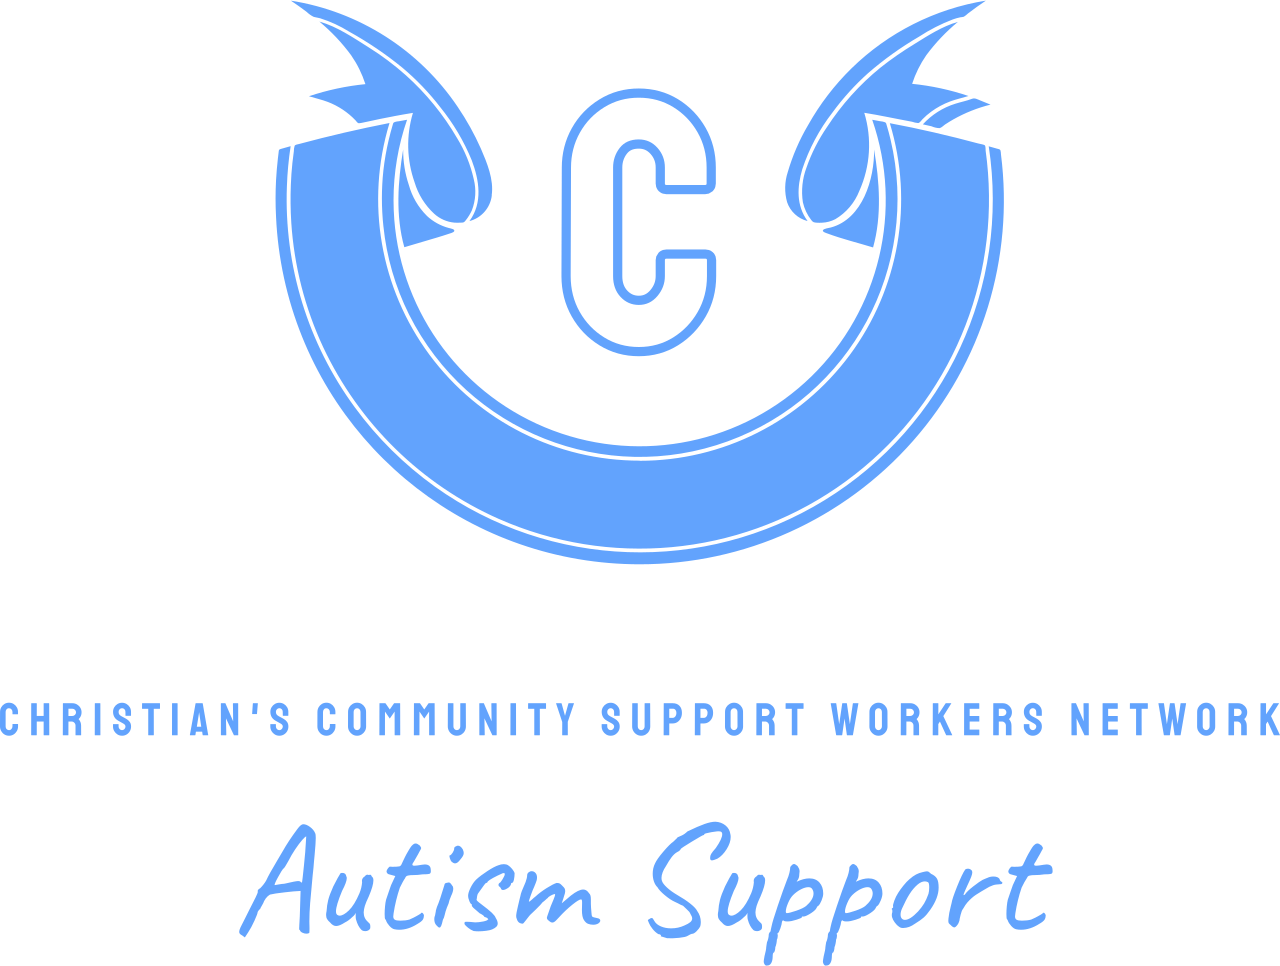 Christian's Community Support Workers Network's web page